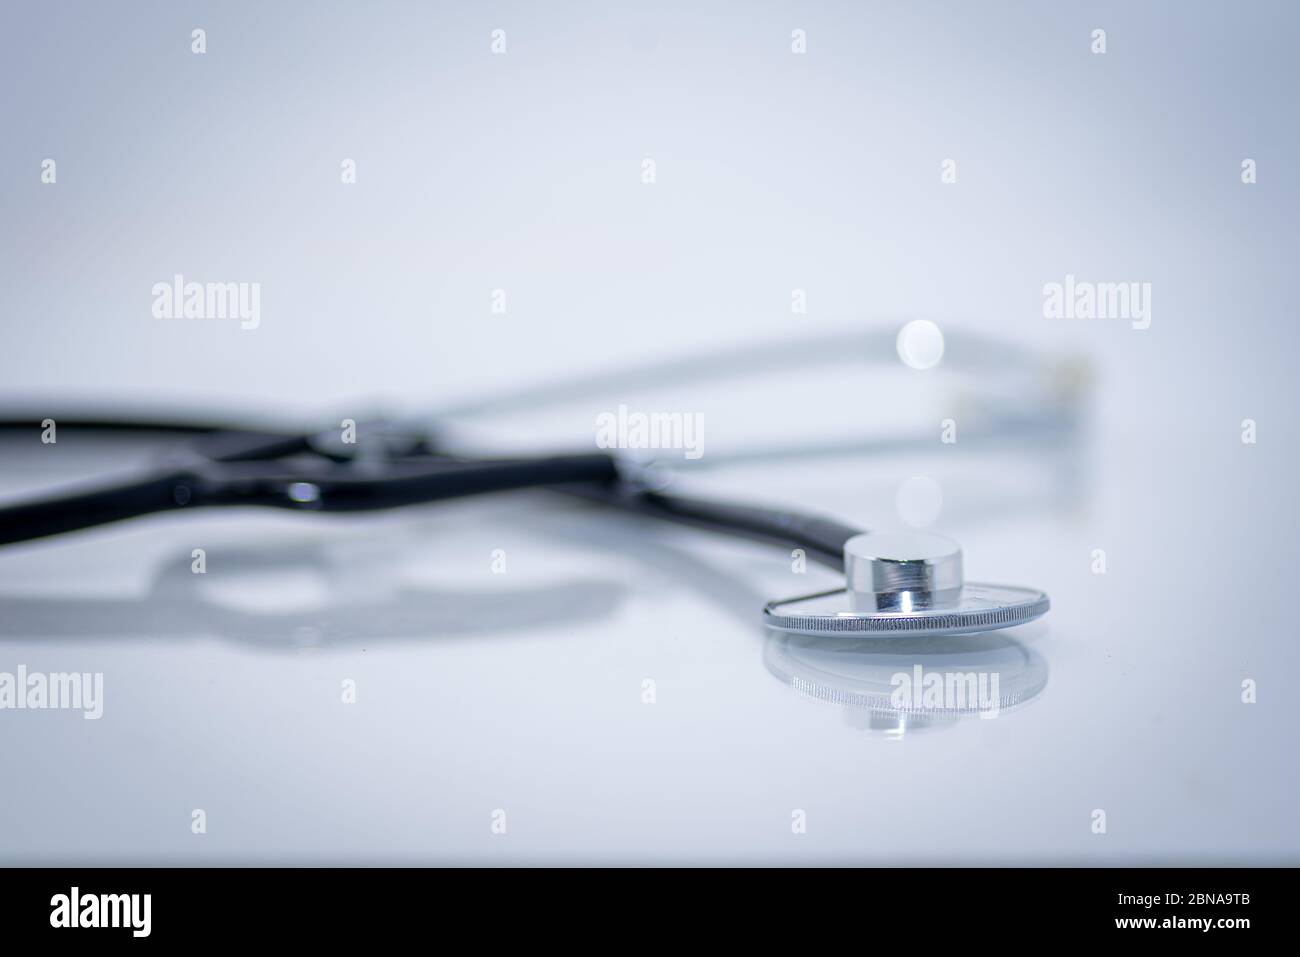 Stethoscope with reflection on the surface Stethoscope, White Background, Cut Out, Healthcare And Medicine, Medical Exam Stock Photo